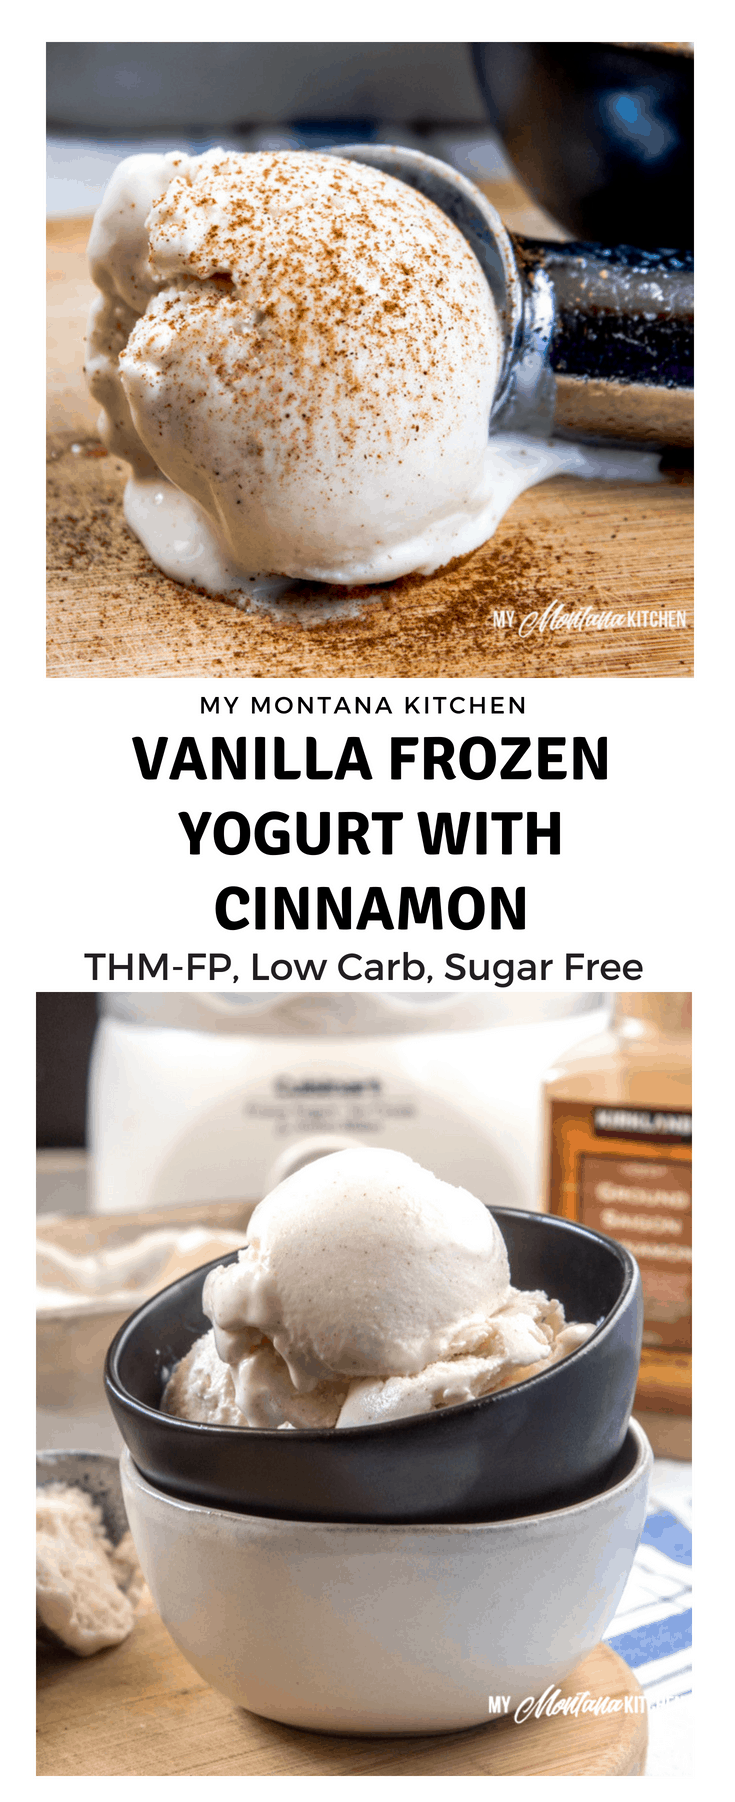 Sweet, tangy, and filled with comforting cinnamon, this easy Vanilla Frozen Yogurt recipe makes a super snack. Filled with protein, but light in calories, it is also a Trim Healthy Mama Fuel Pull Dessert! #trimhealthymama #thm #thmfp #lowcarb #lowfat #sugarfree #frozenyogurt #icecream #cinnamon #vanilla #vanillafrozenyogurt